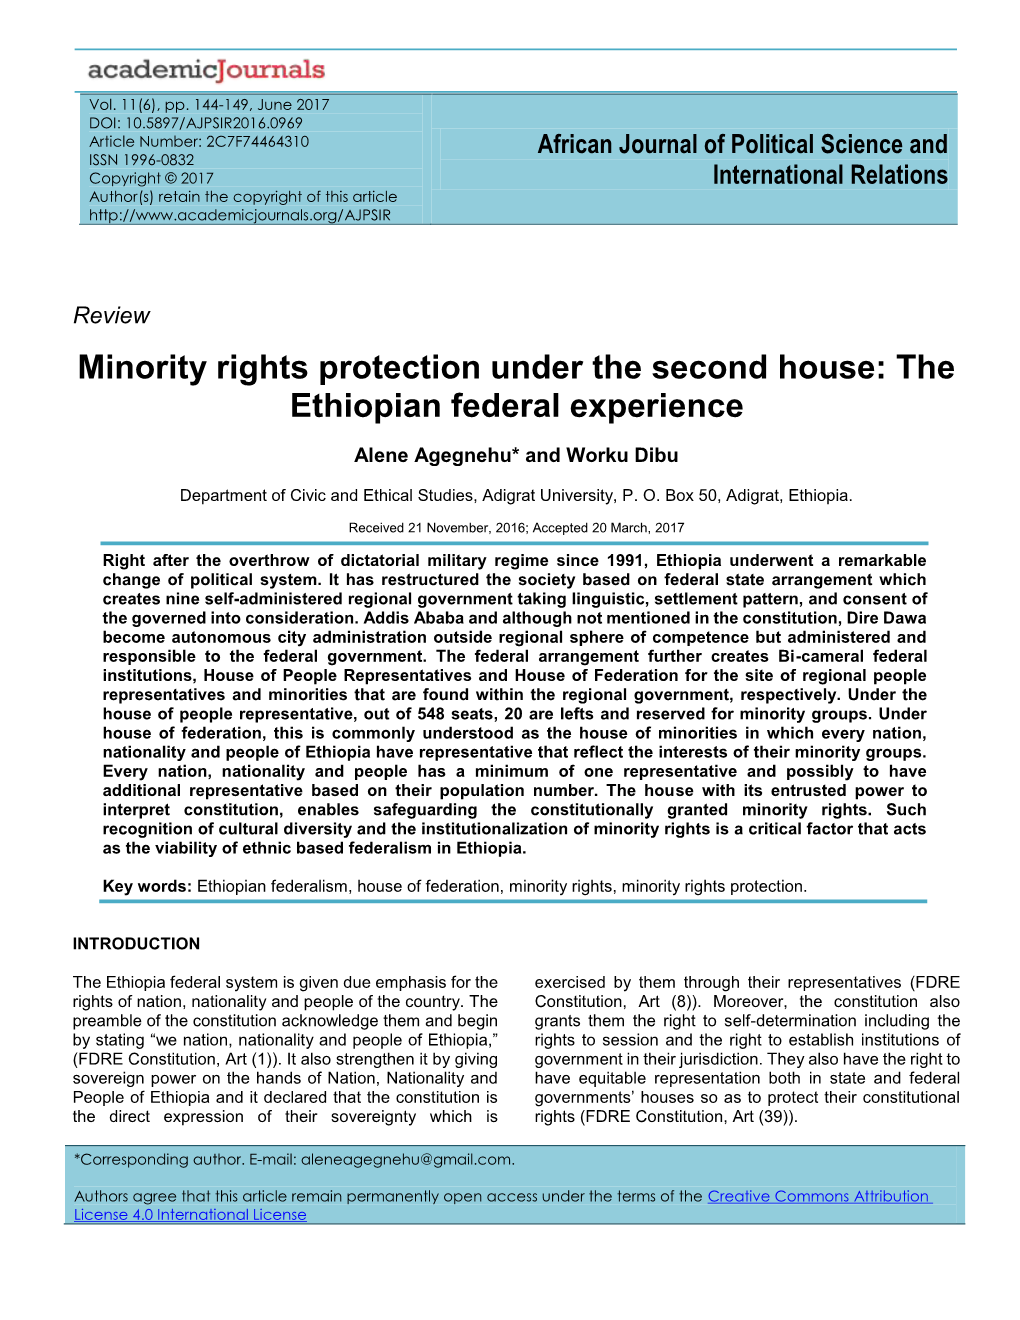 Minority Rights Protection Under the Second House: the Ethiopian Federal Experience